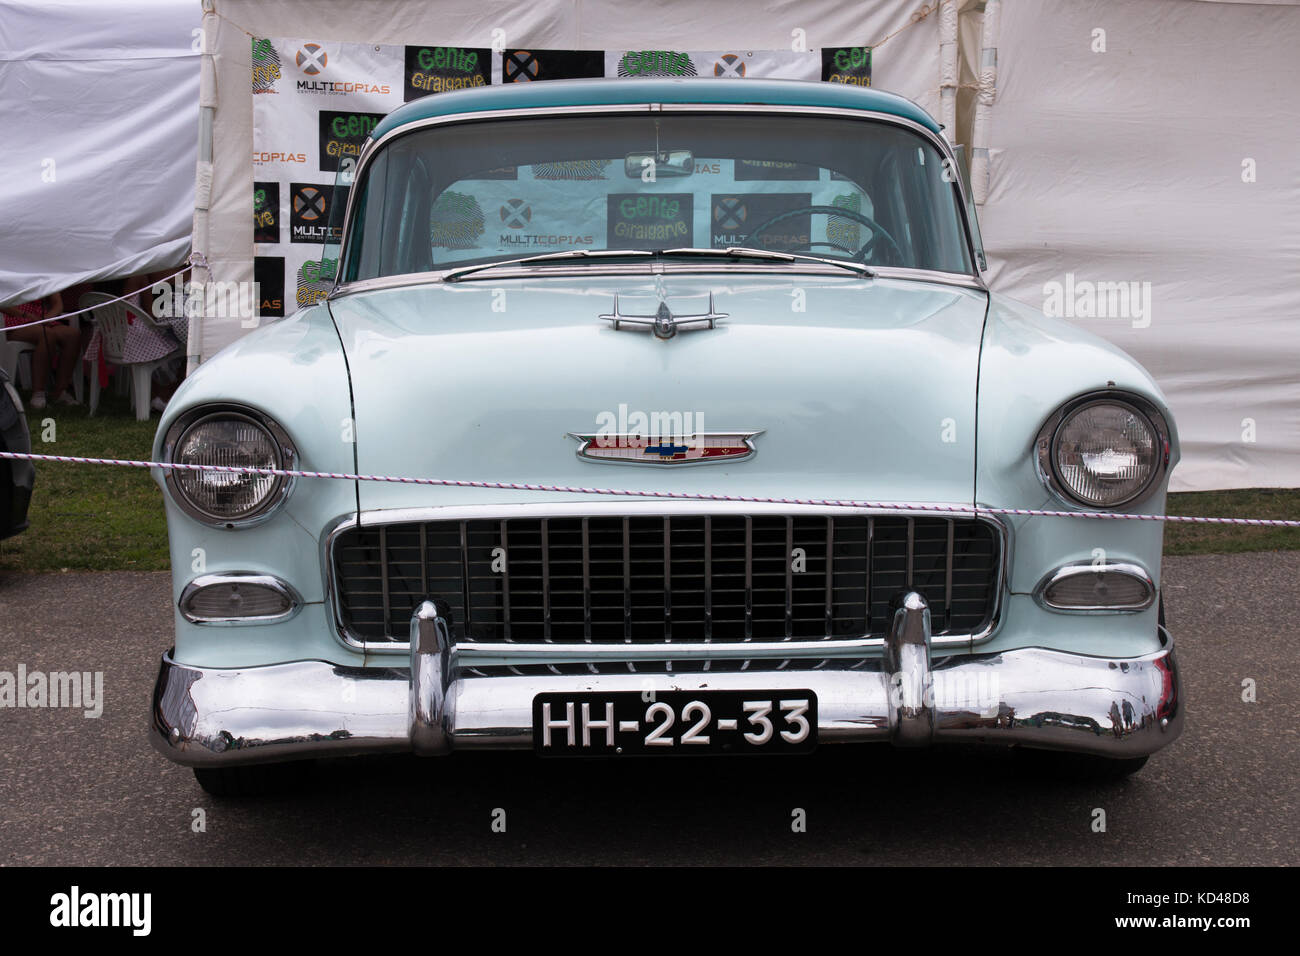 FARO, PORTUGAL, 26th August 2017: 6º American Cars Show Algarve Event where several vintage cars are in display and a mix of Americana related activit Stock Photo